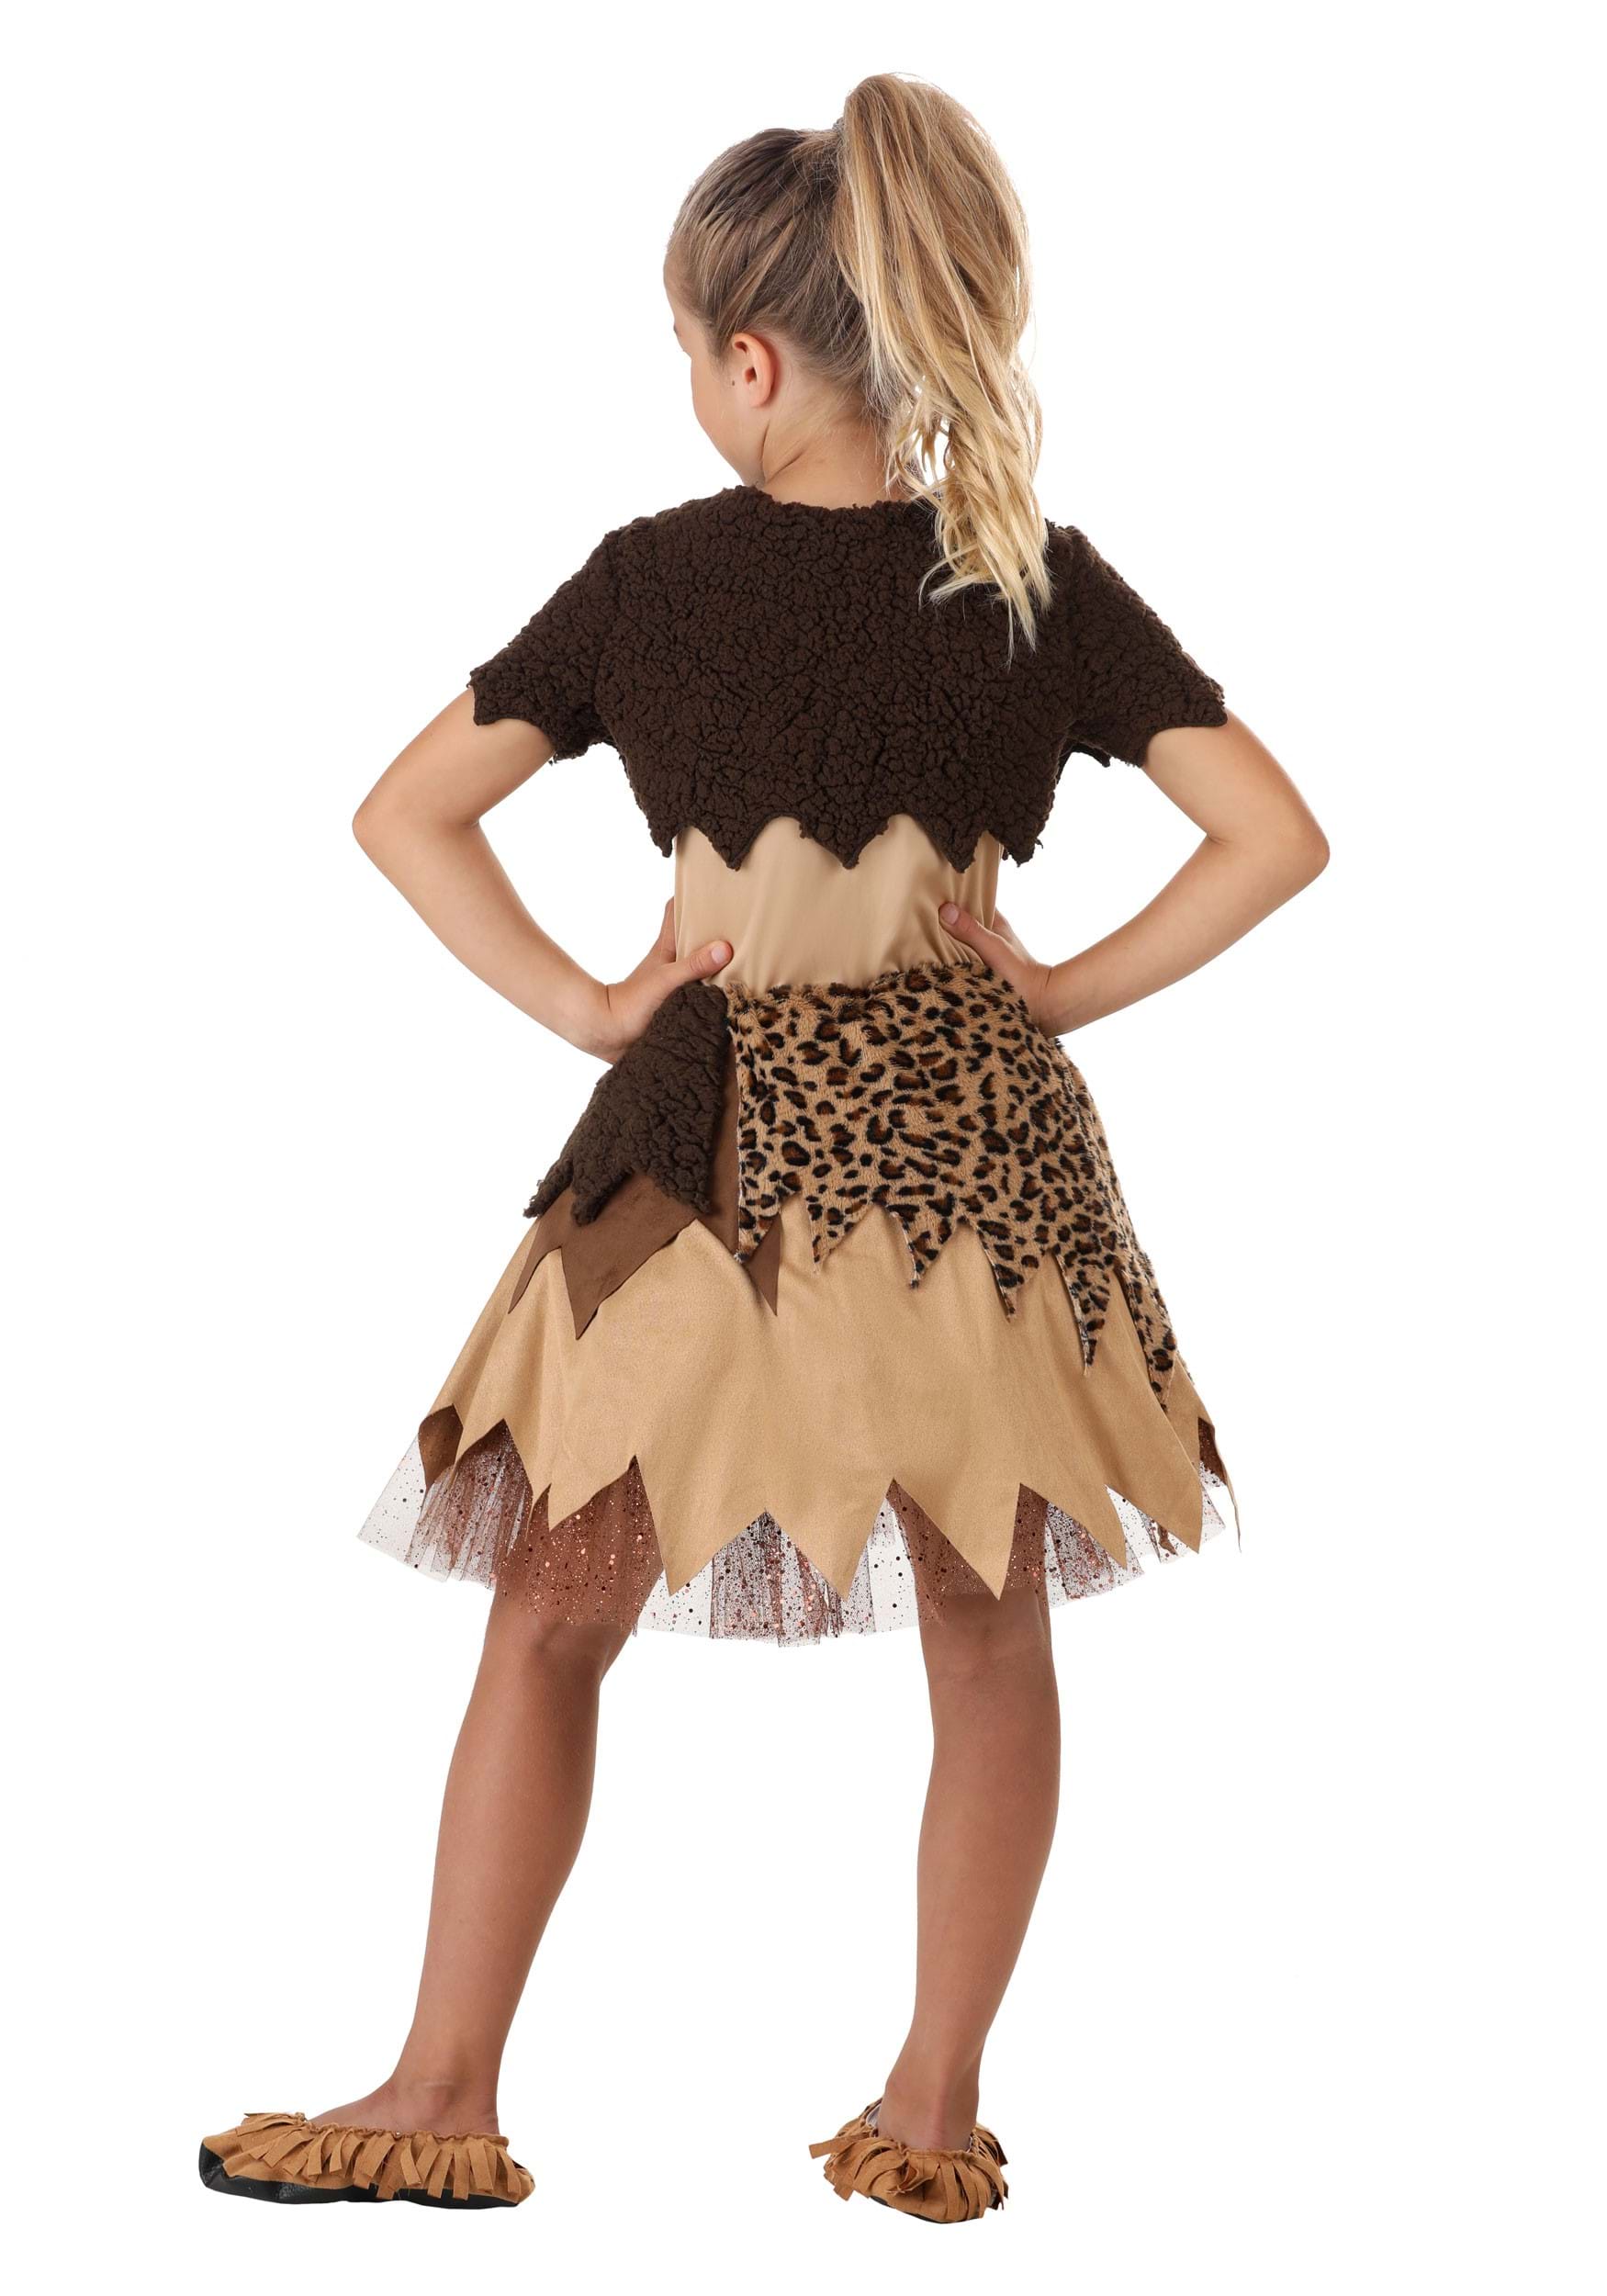 Pin on Cave Women Costumes